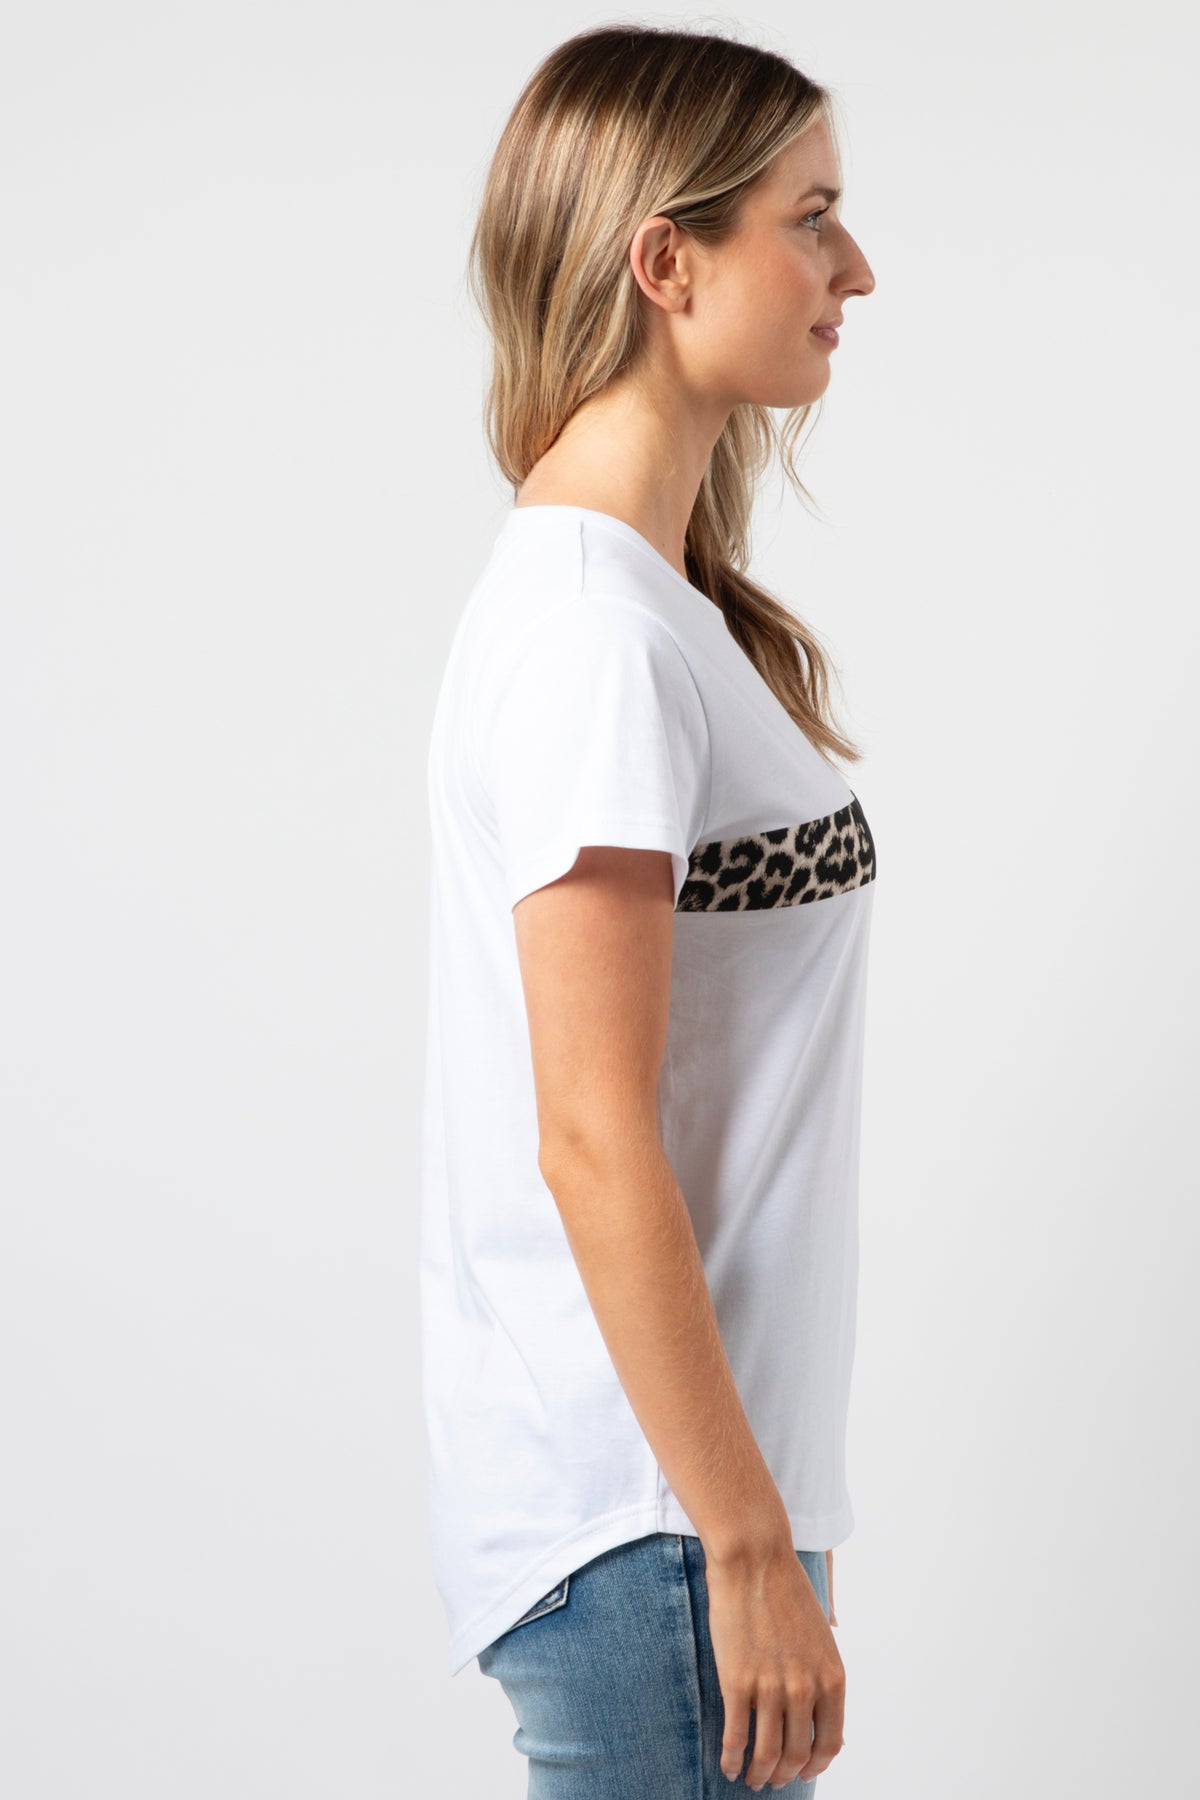 T-Shirt White With Leopard Stripe